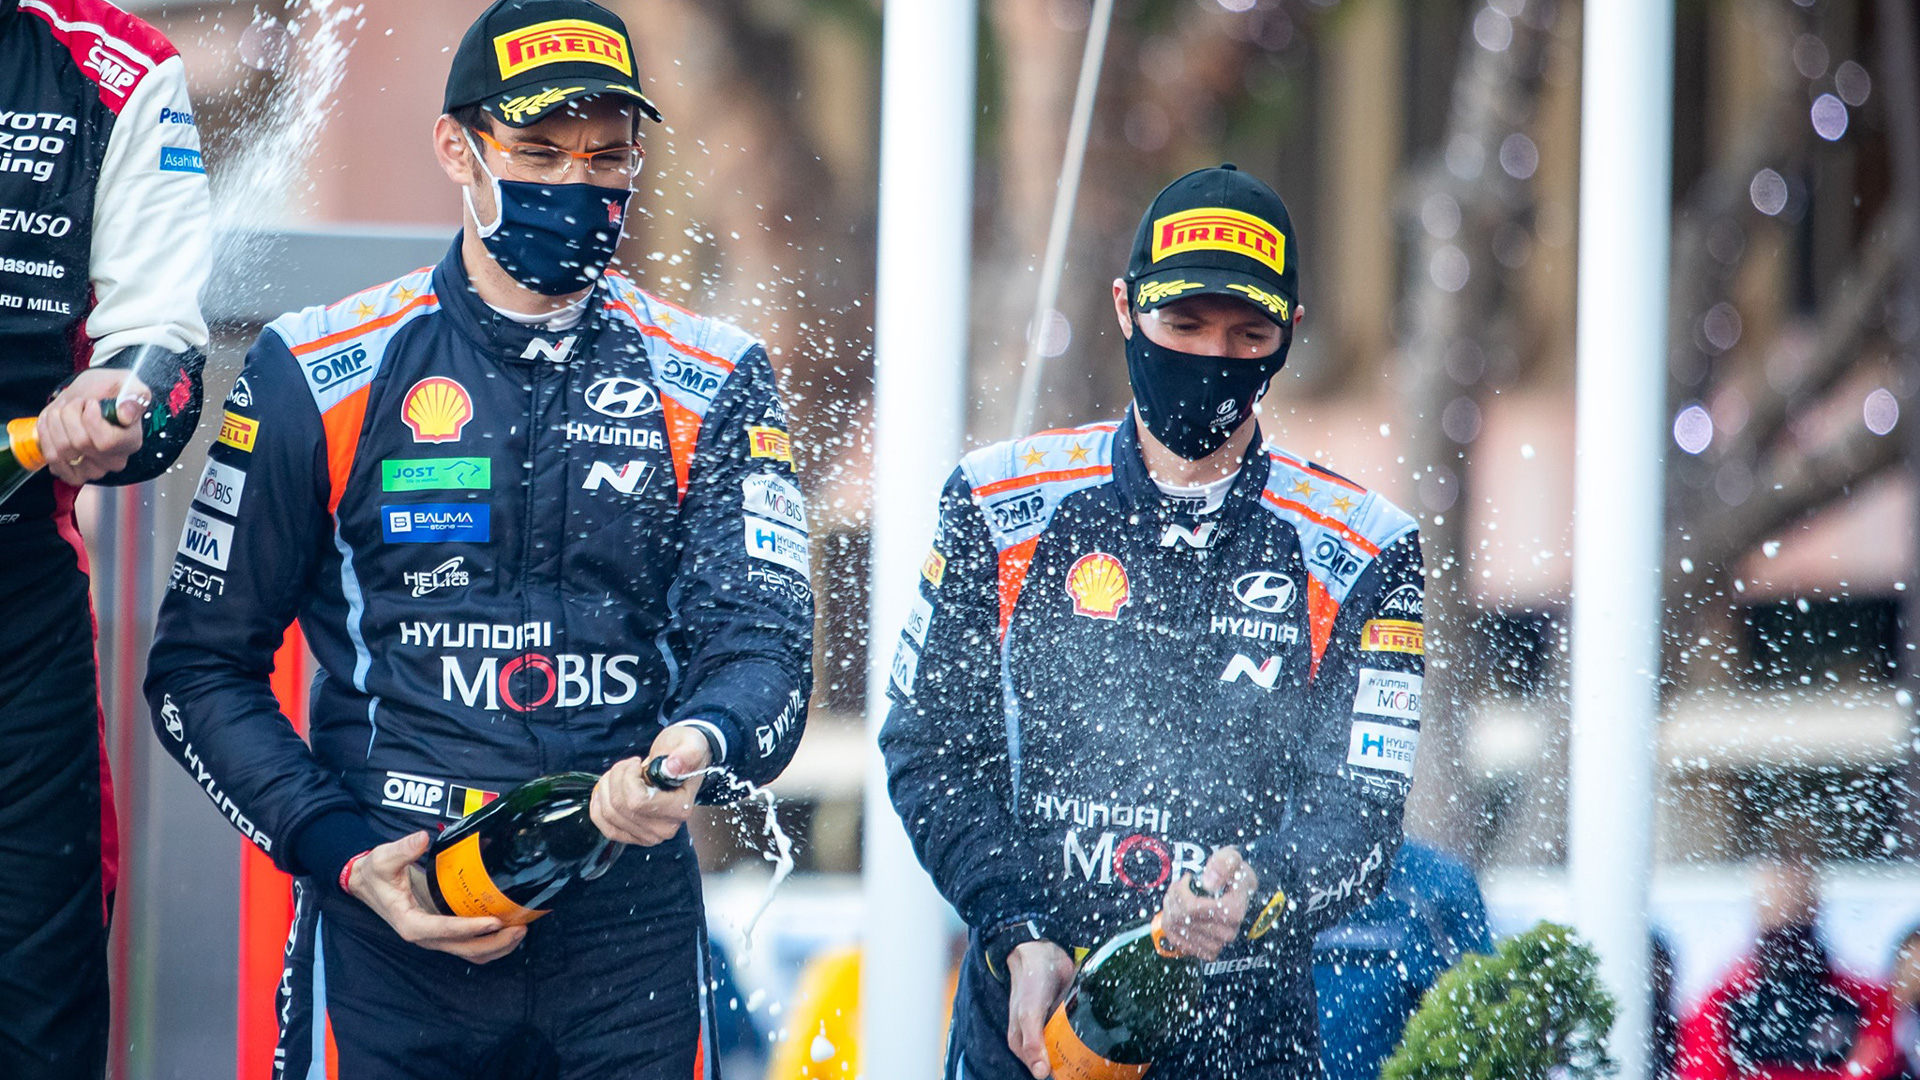 Hyundai motorsports team Thierry Neuville celebrating the second with co-driver at podium